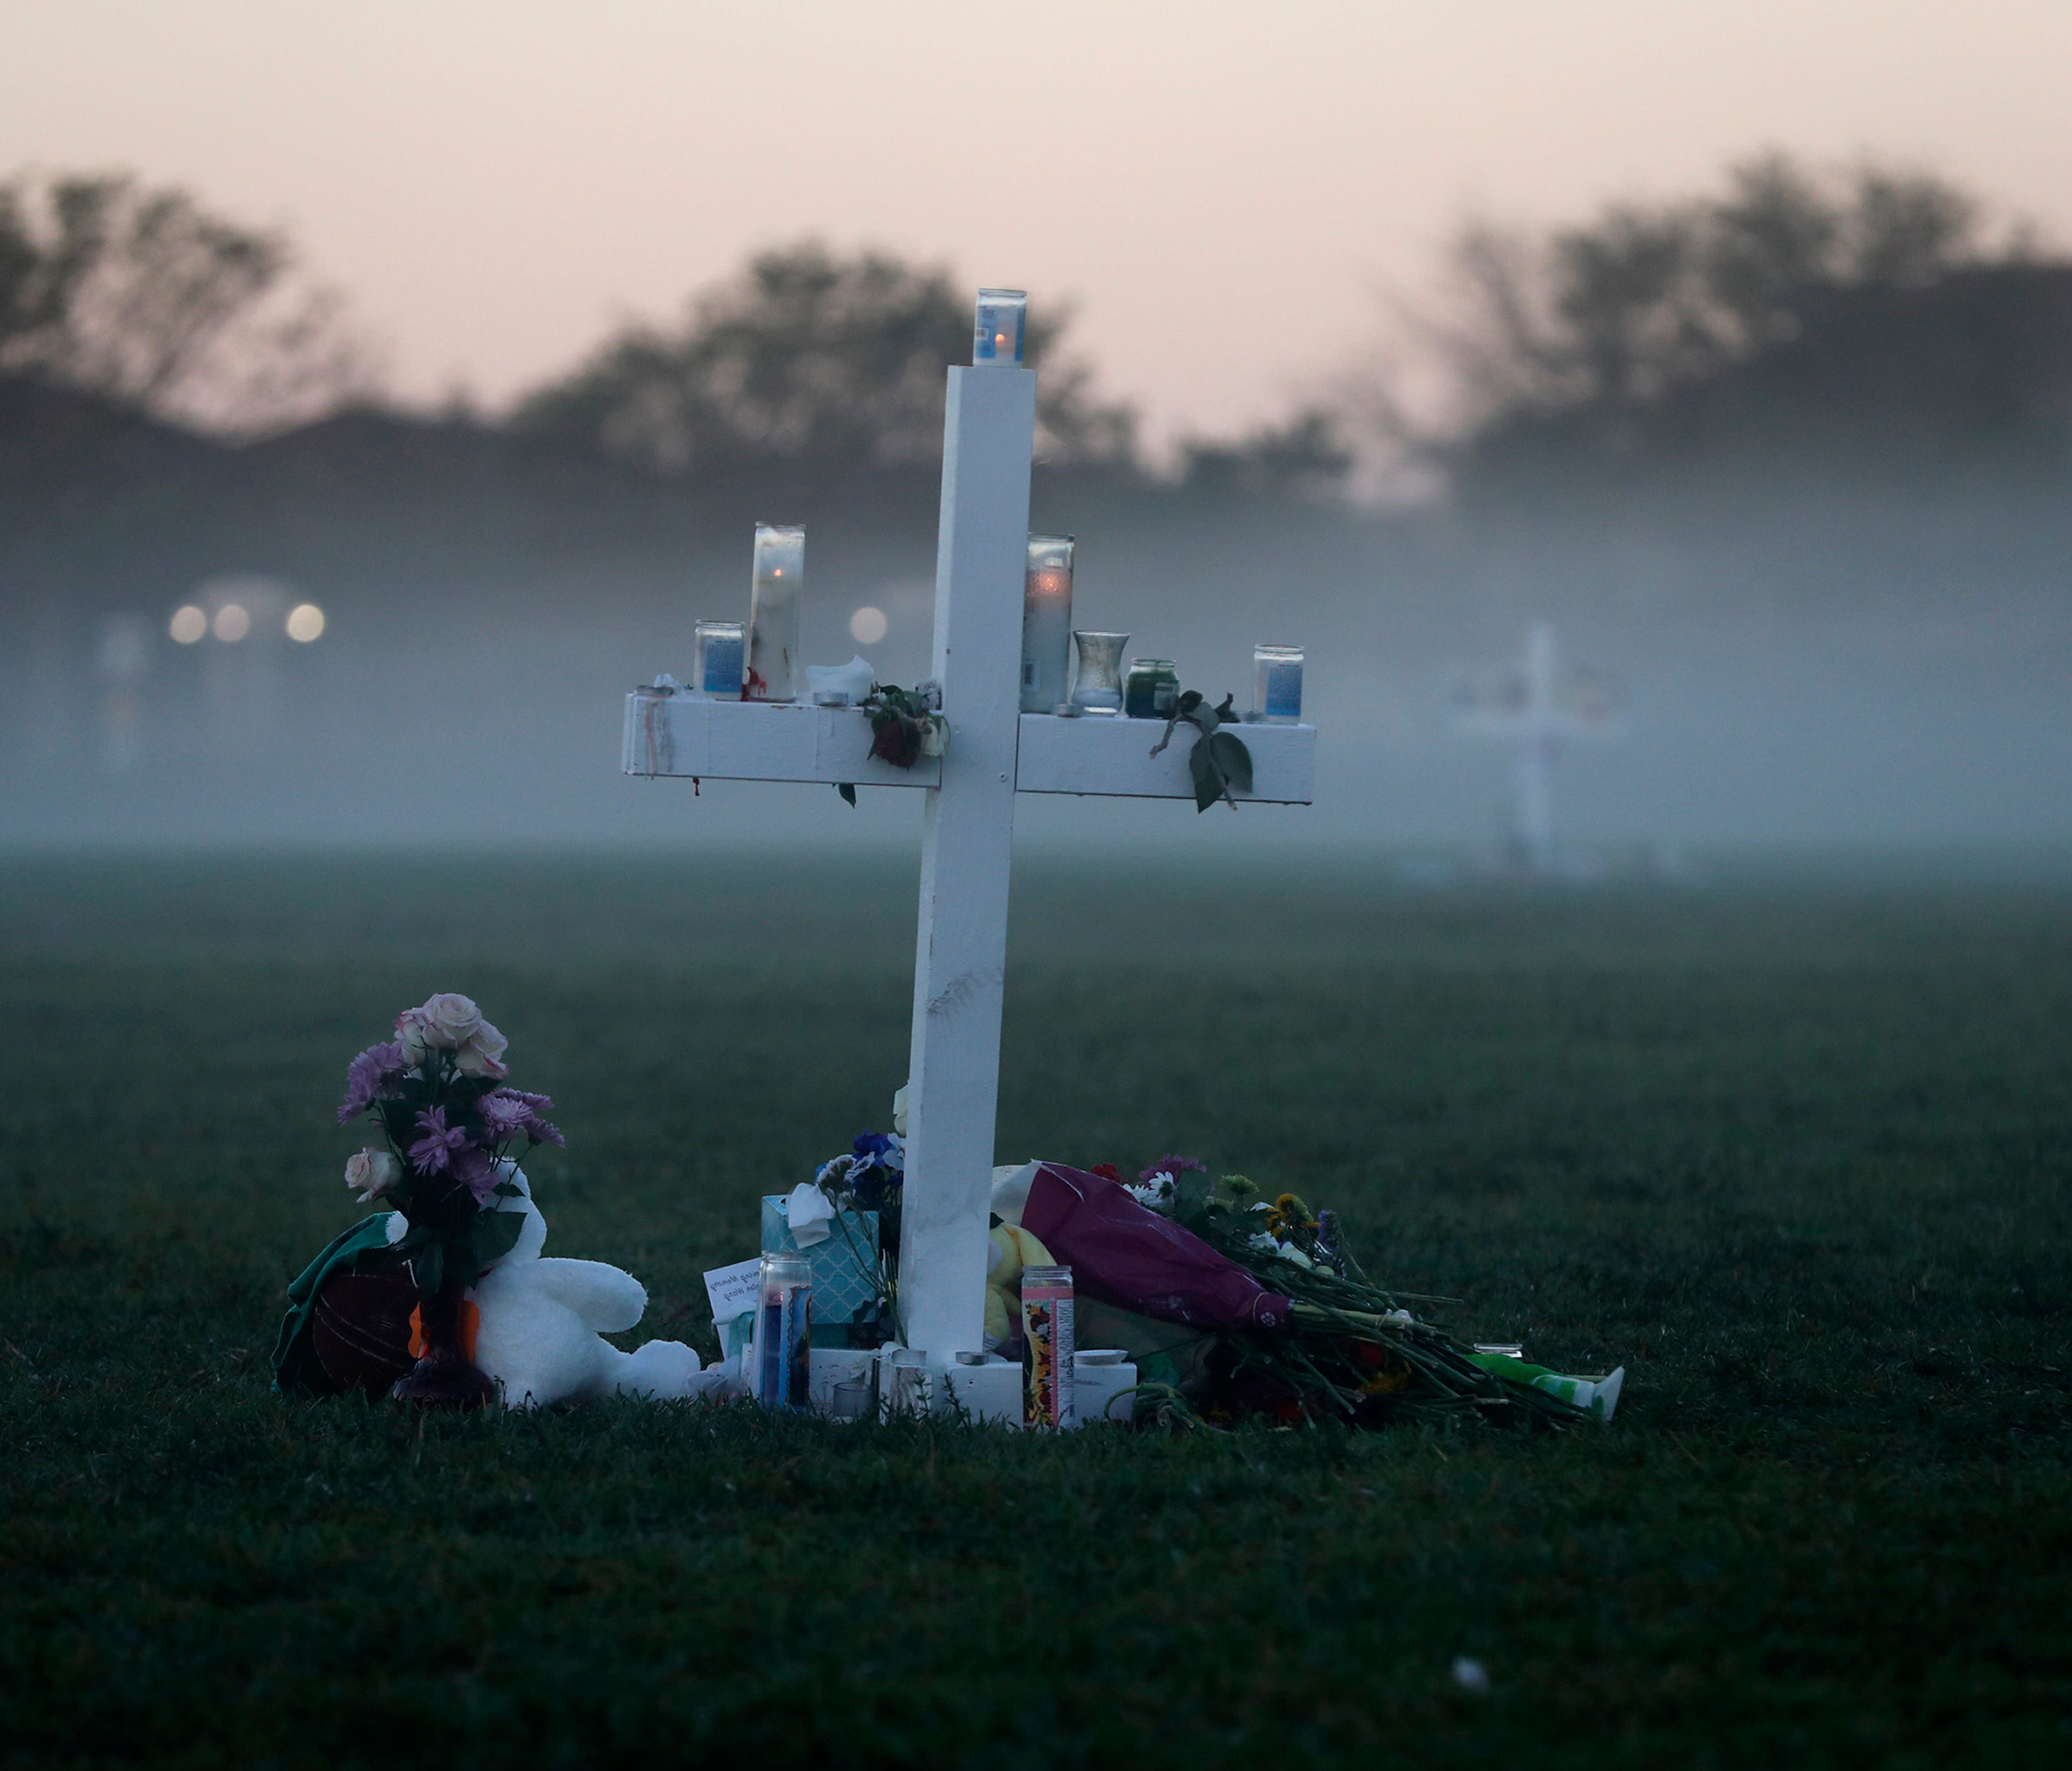 An early morning fog rises where 17 memorial crosses were placed for the 17 deceased students and faculty from the Wednesday shooting at Marjory Stoneman Douglas High School, in Parkland, Fla.